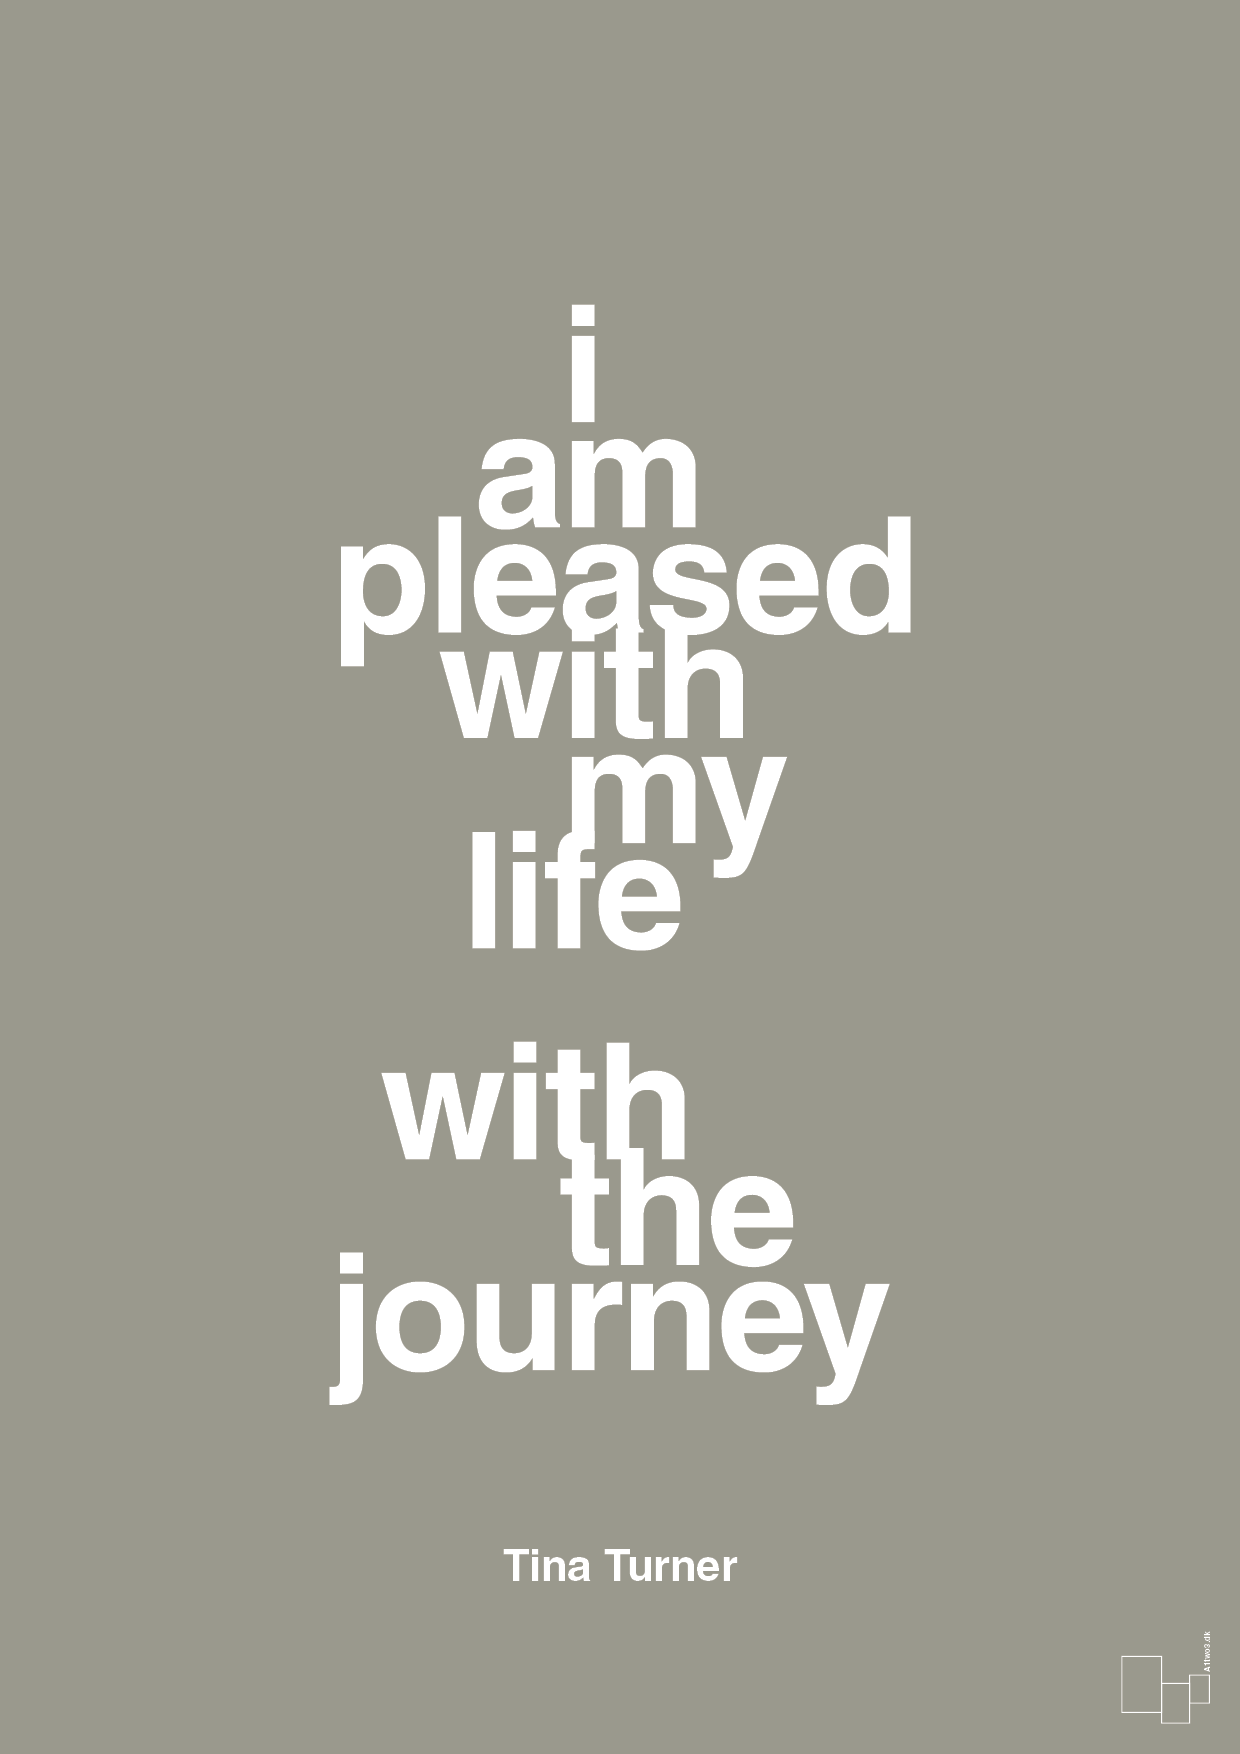 i am pleased with my life with the journey - Plakat med Citater i Battleship Gray